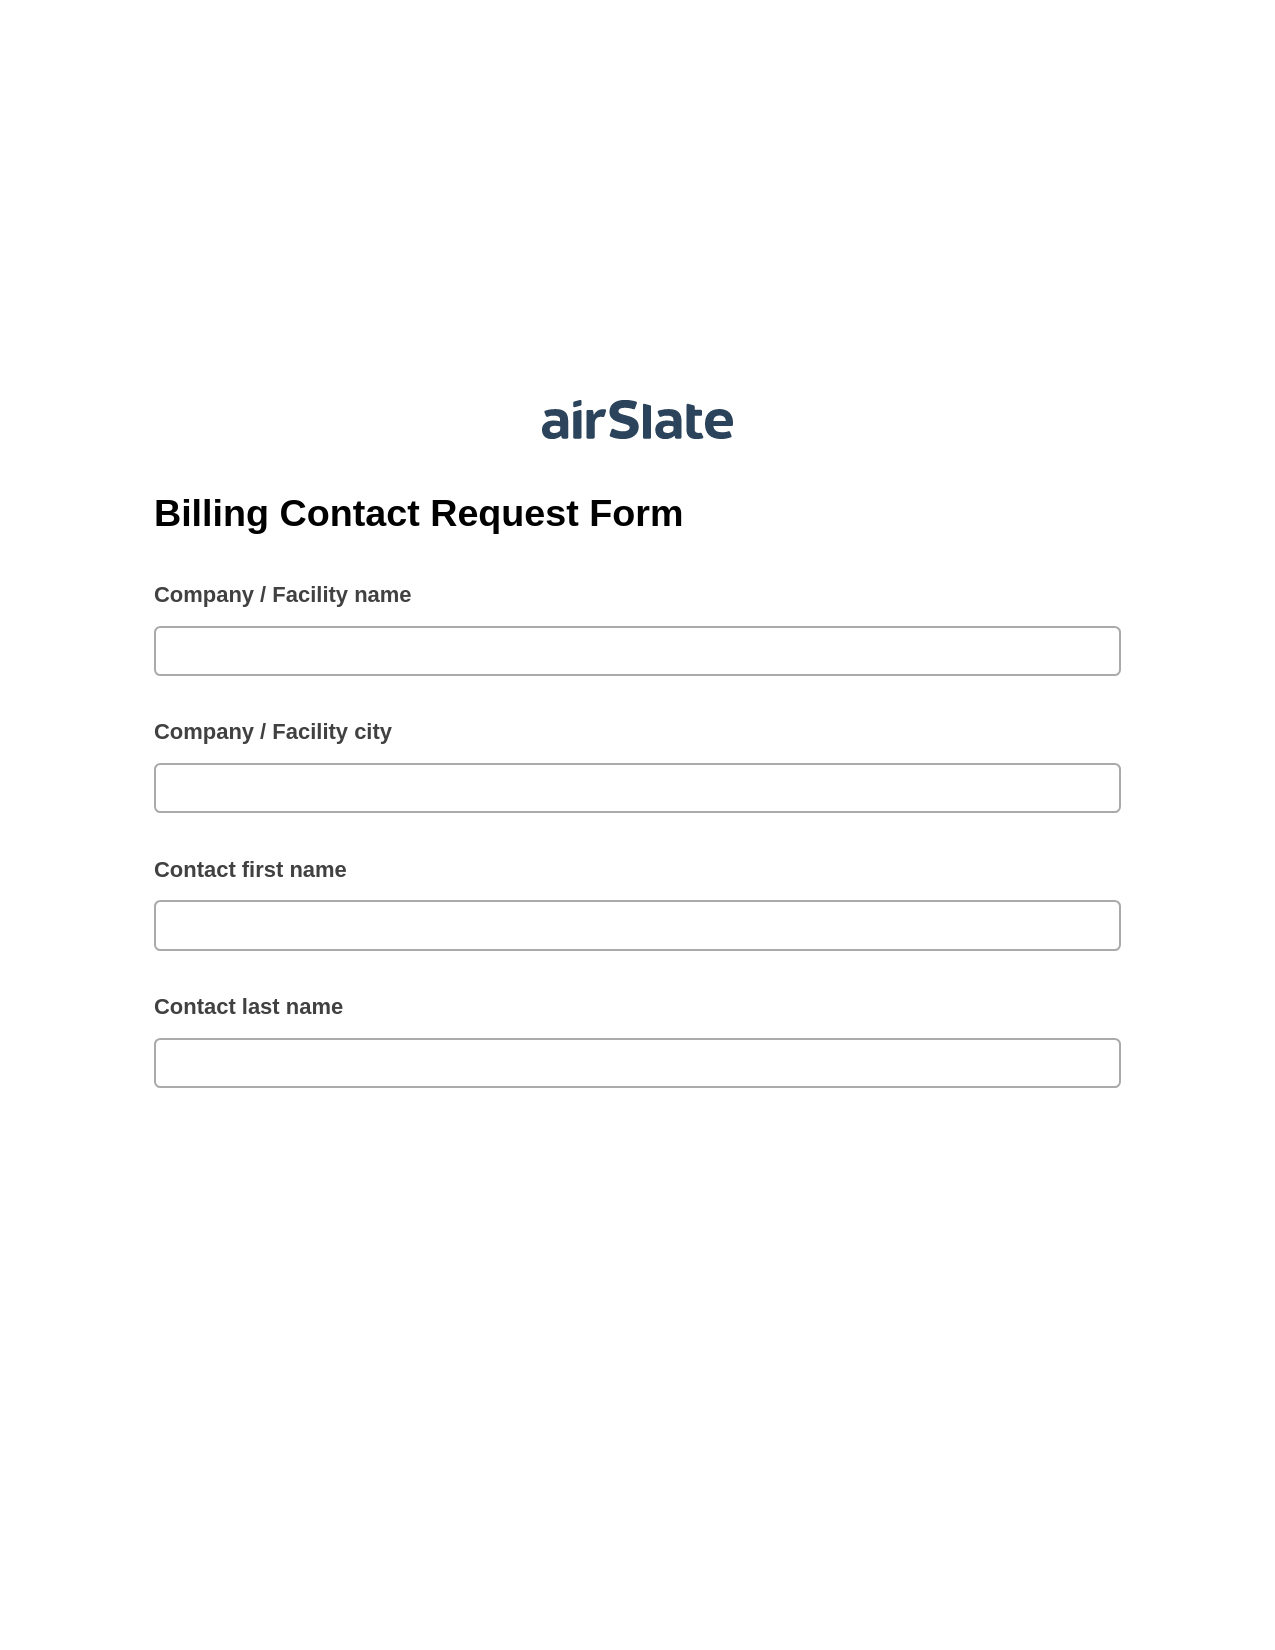 Multirole Billing Contact Request Form Pre-fill Slate from MS Dynamics 365 Records Bot, Google Sheet Two-Way Binding Bot, Webhook Postfinish Bot